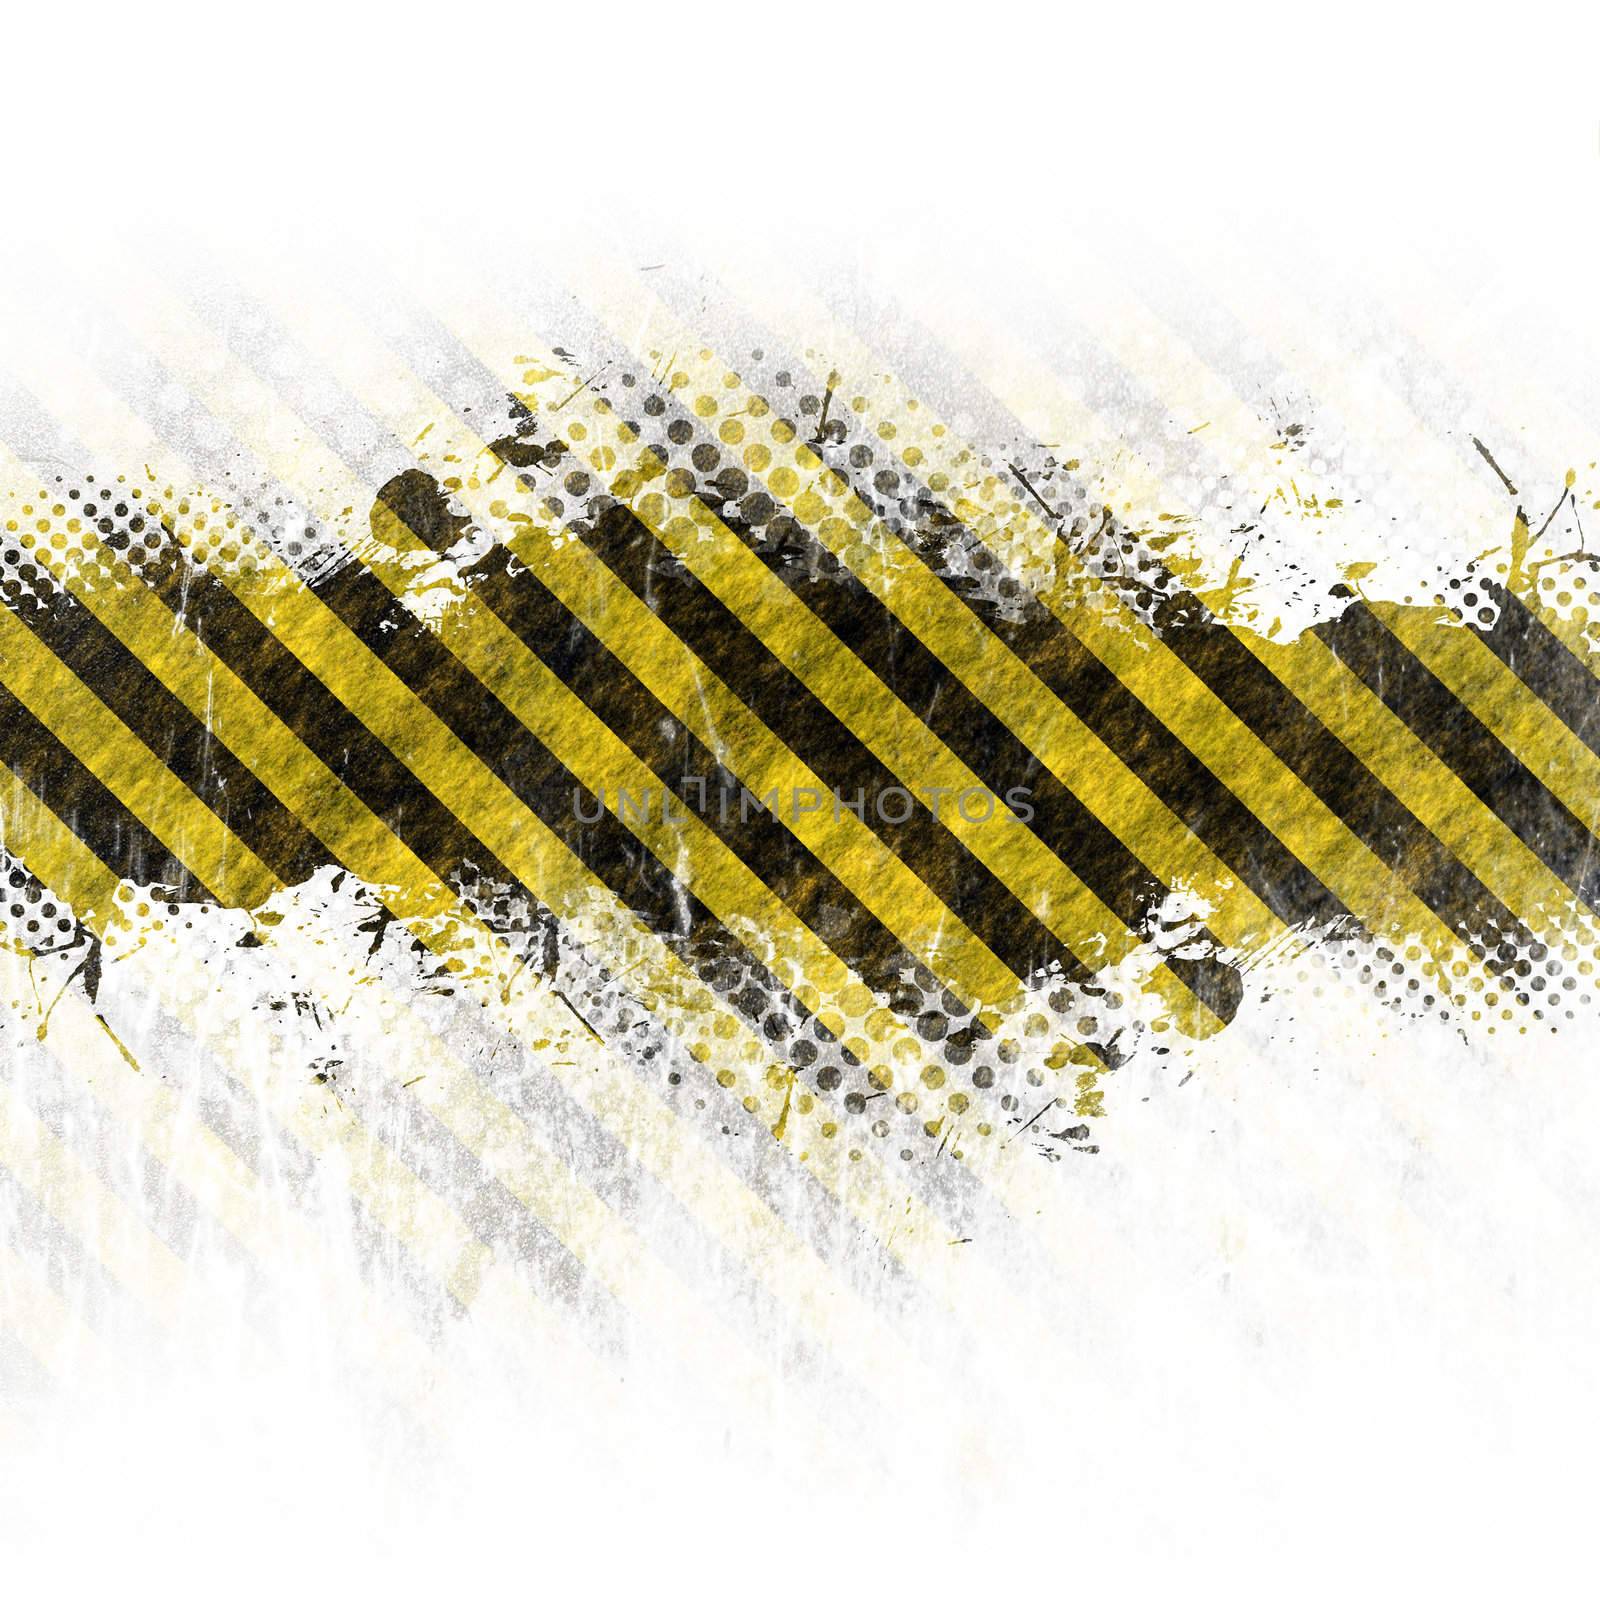 A hazard stripes background with grungy splatter isolated over white.